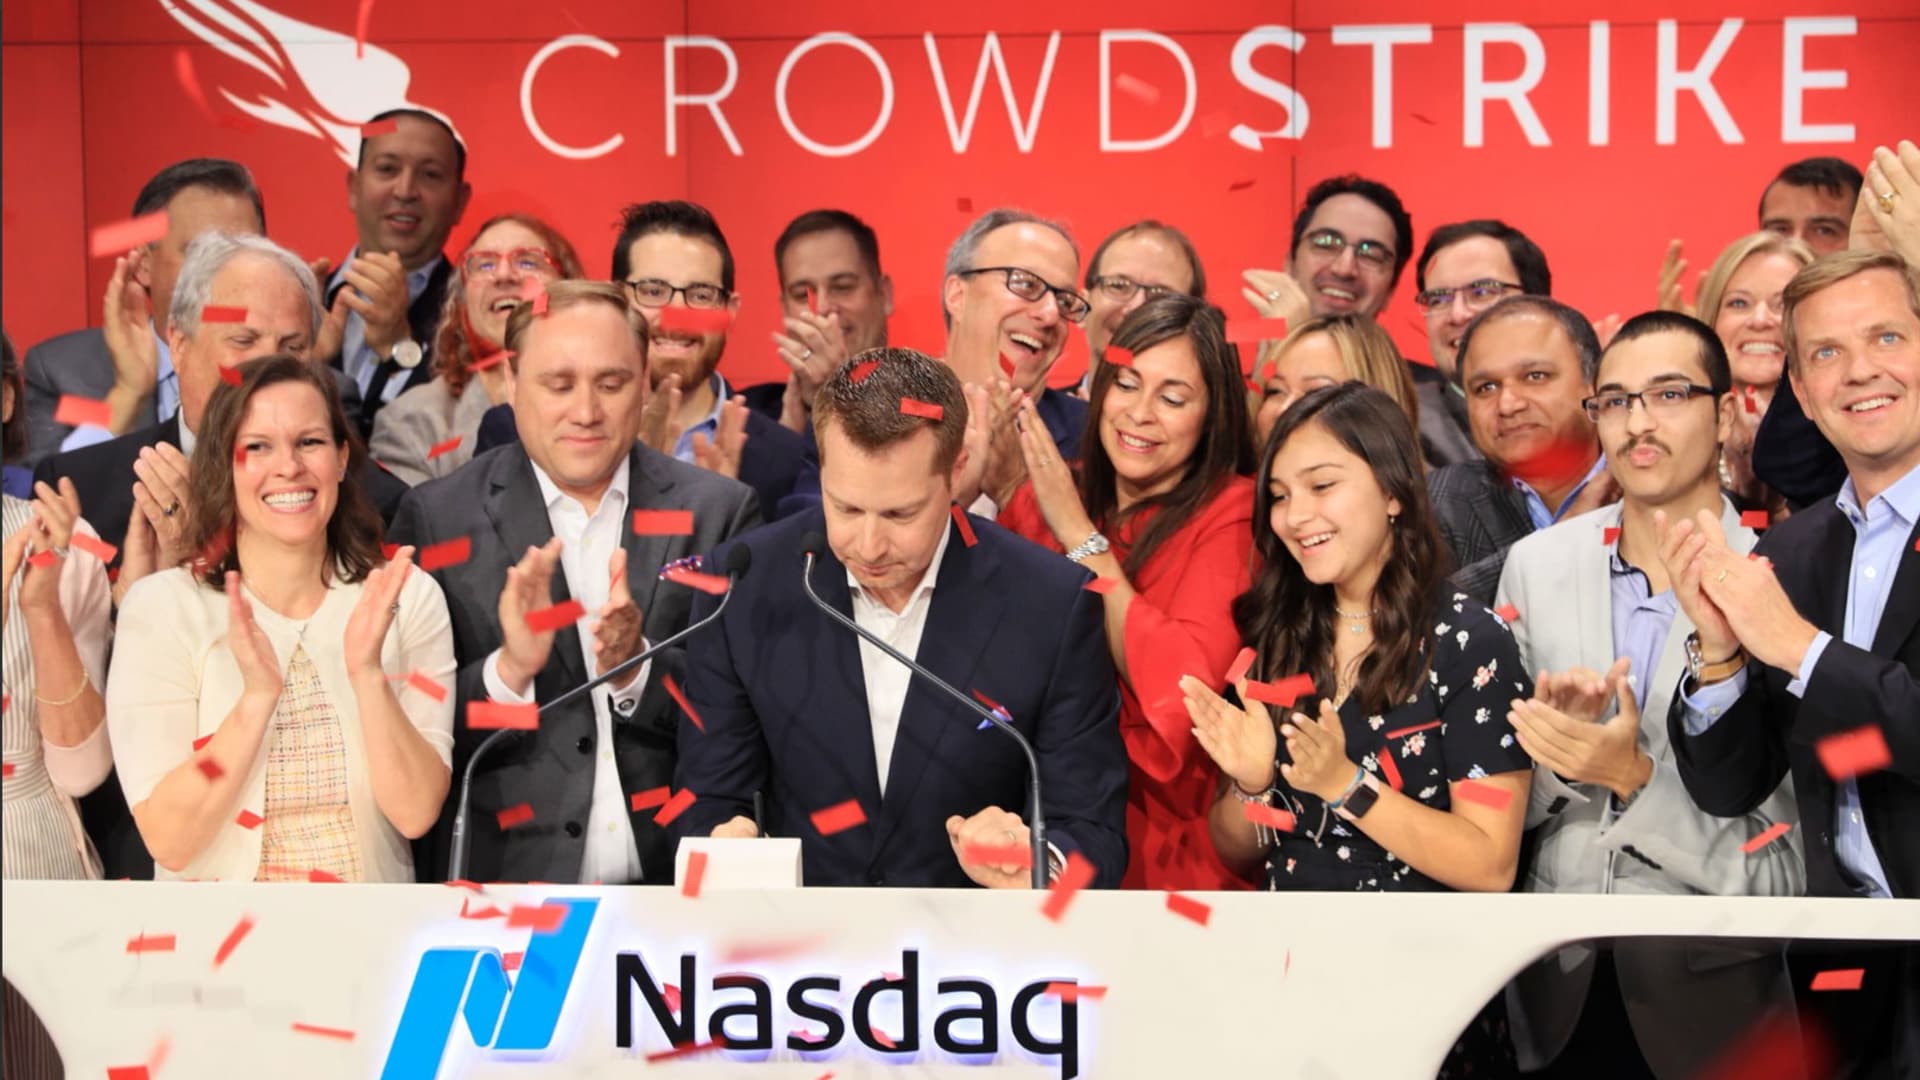 CrowdStrike could collect more than 30% as companies adopt the cloud, says MKM Partners